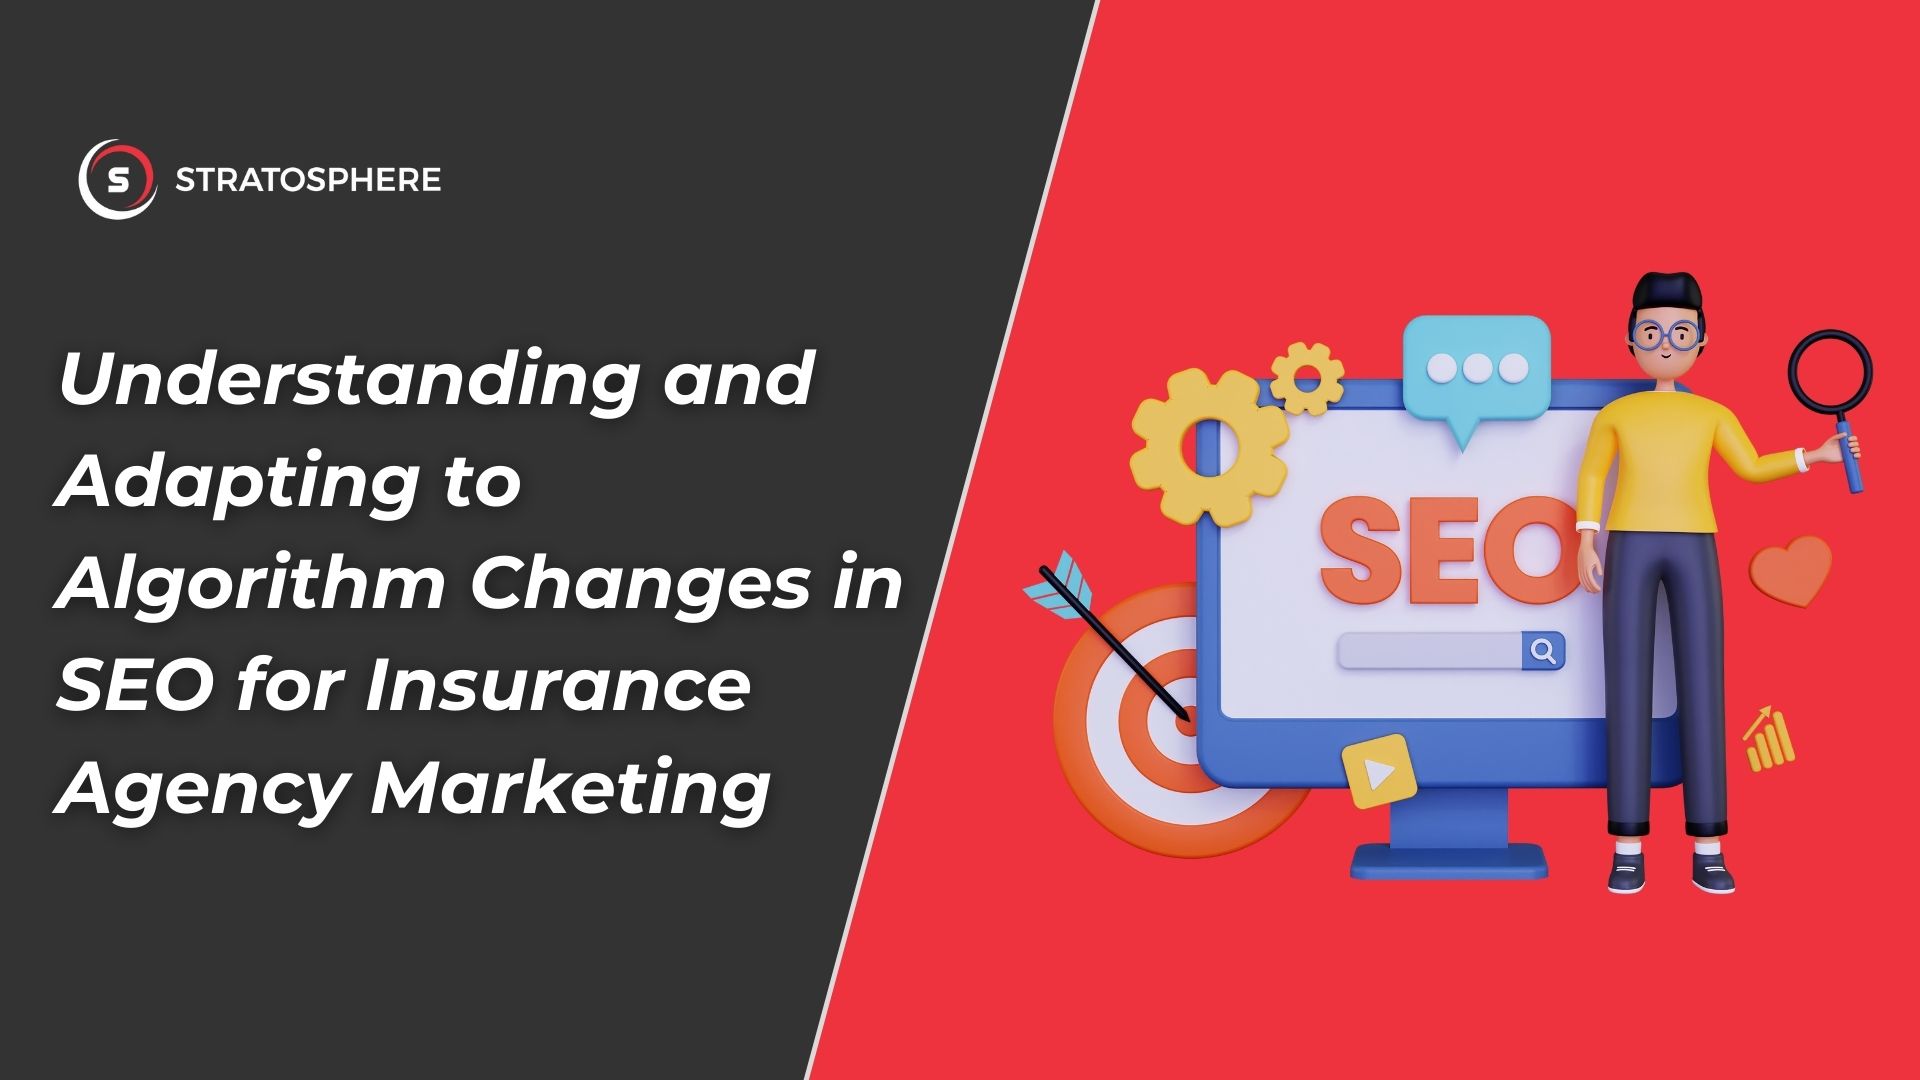 SEO for Insurance Agency Marketing - Understanding and Adapting to Algorithm Changes